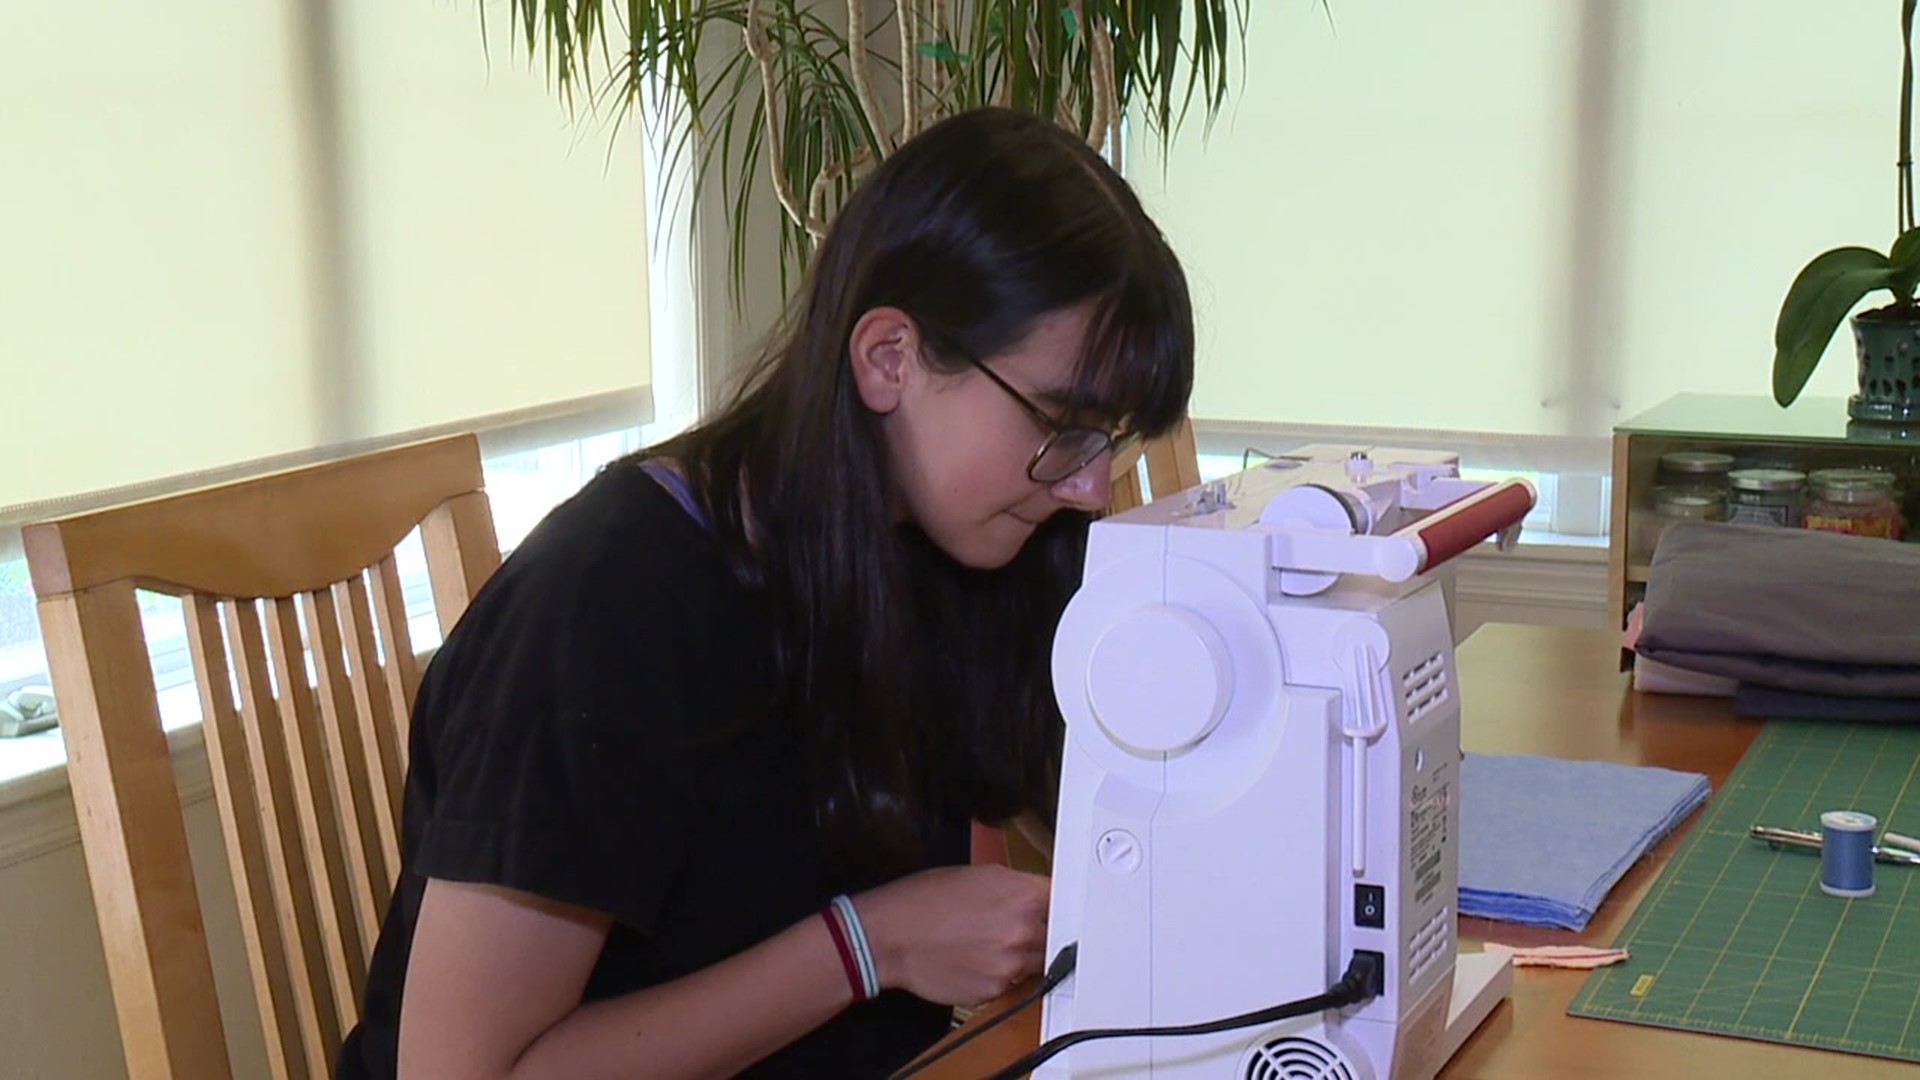 A high school student in Clinton County started making cloth masks as part of a senior project but now she wants to use her sewing skills to help out her community.